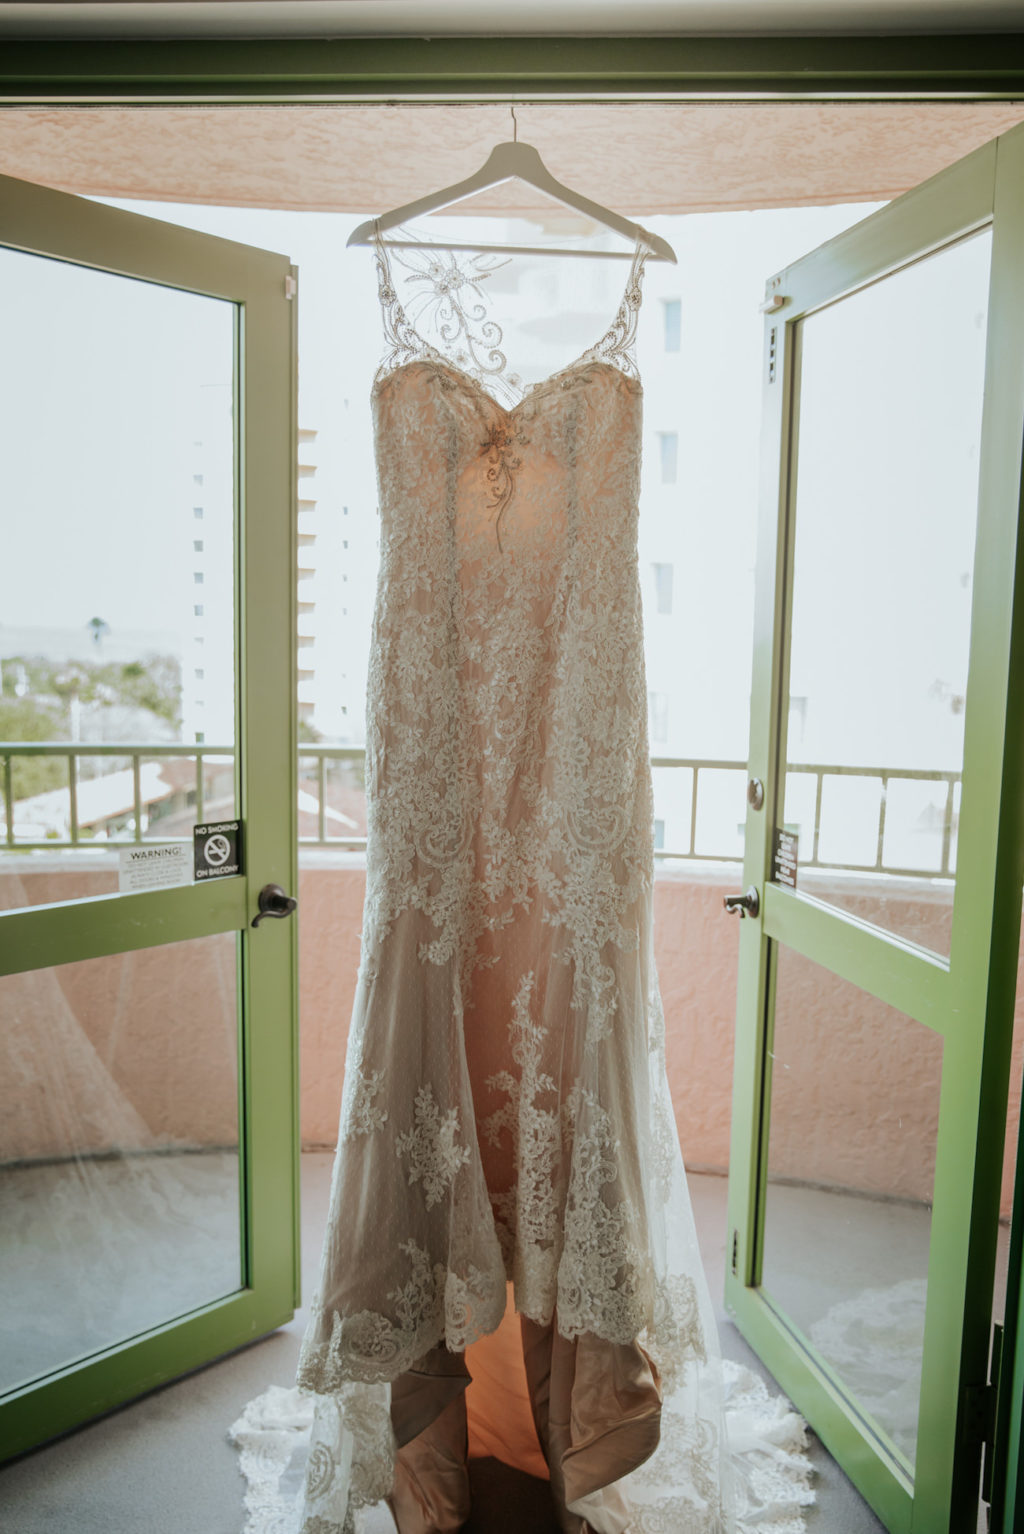 Wedding Dress Hanger Shot | Illusion Lace V Neck Sheath Bridal Gown Wedding Dress with Champagne Liner by Ashley and Justin Bride